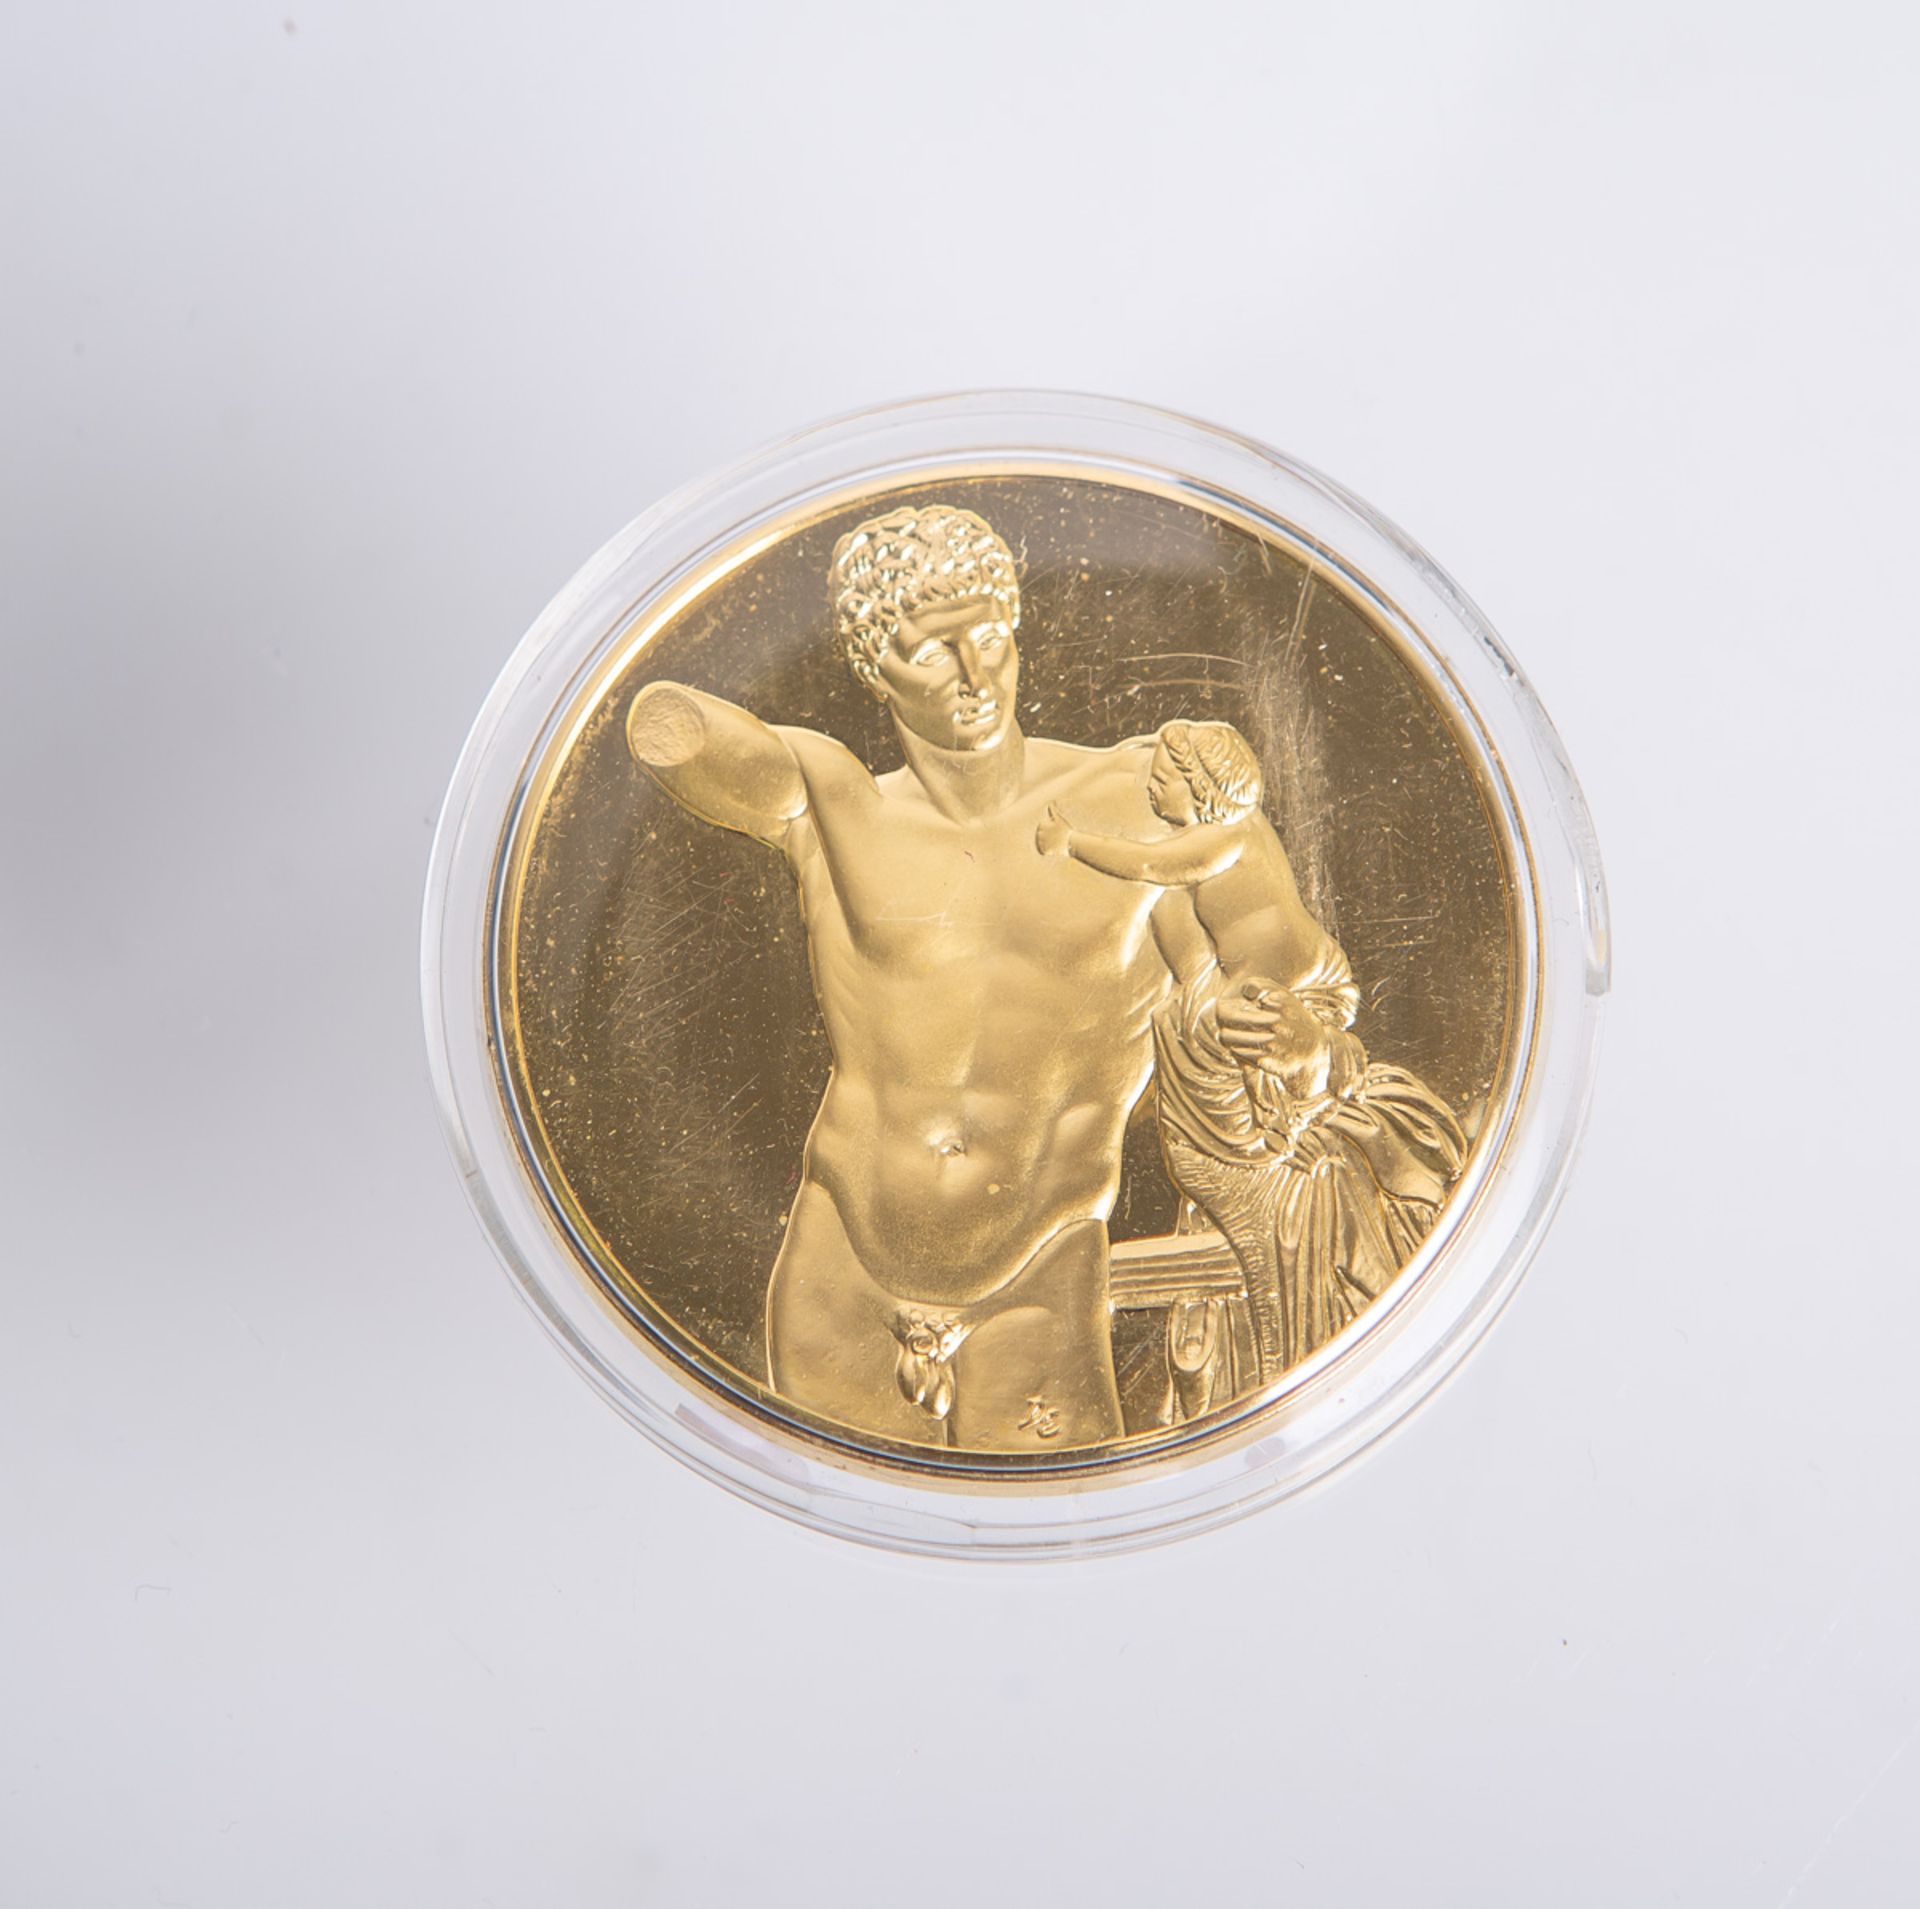 Medaille "Hermes with the infant Dionysos" (USA) - Image 2 of 2